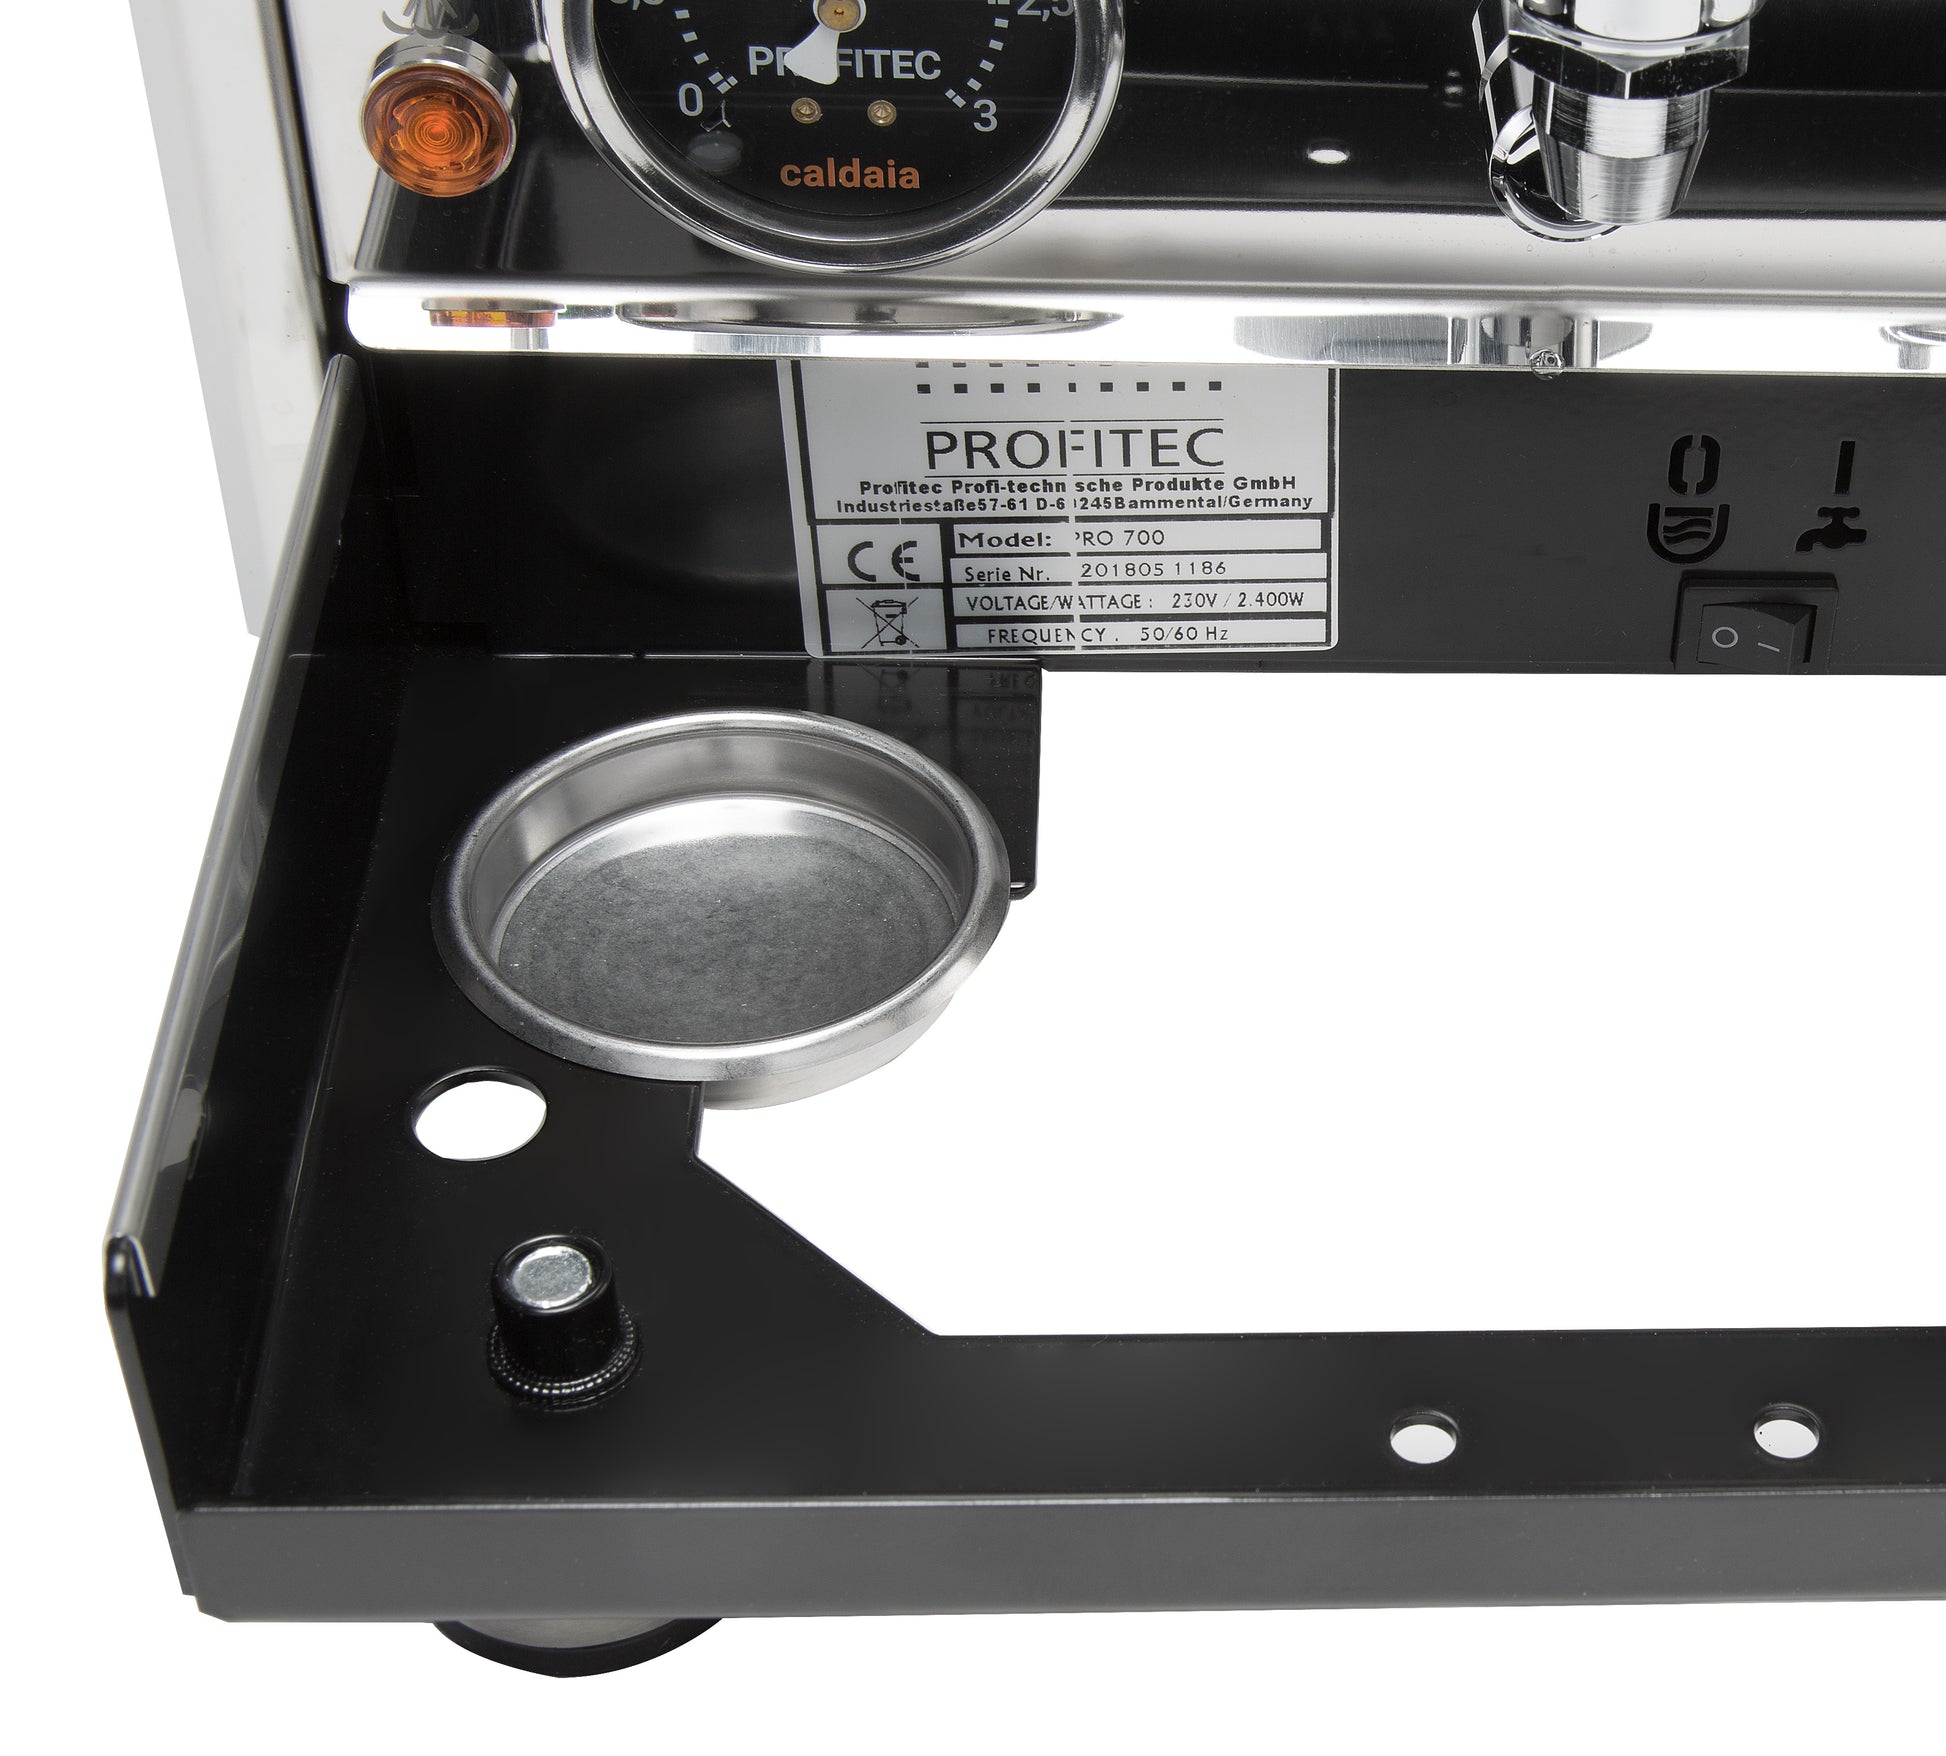 Frame compartment for backflush disc and steam tip and water supply switch.